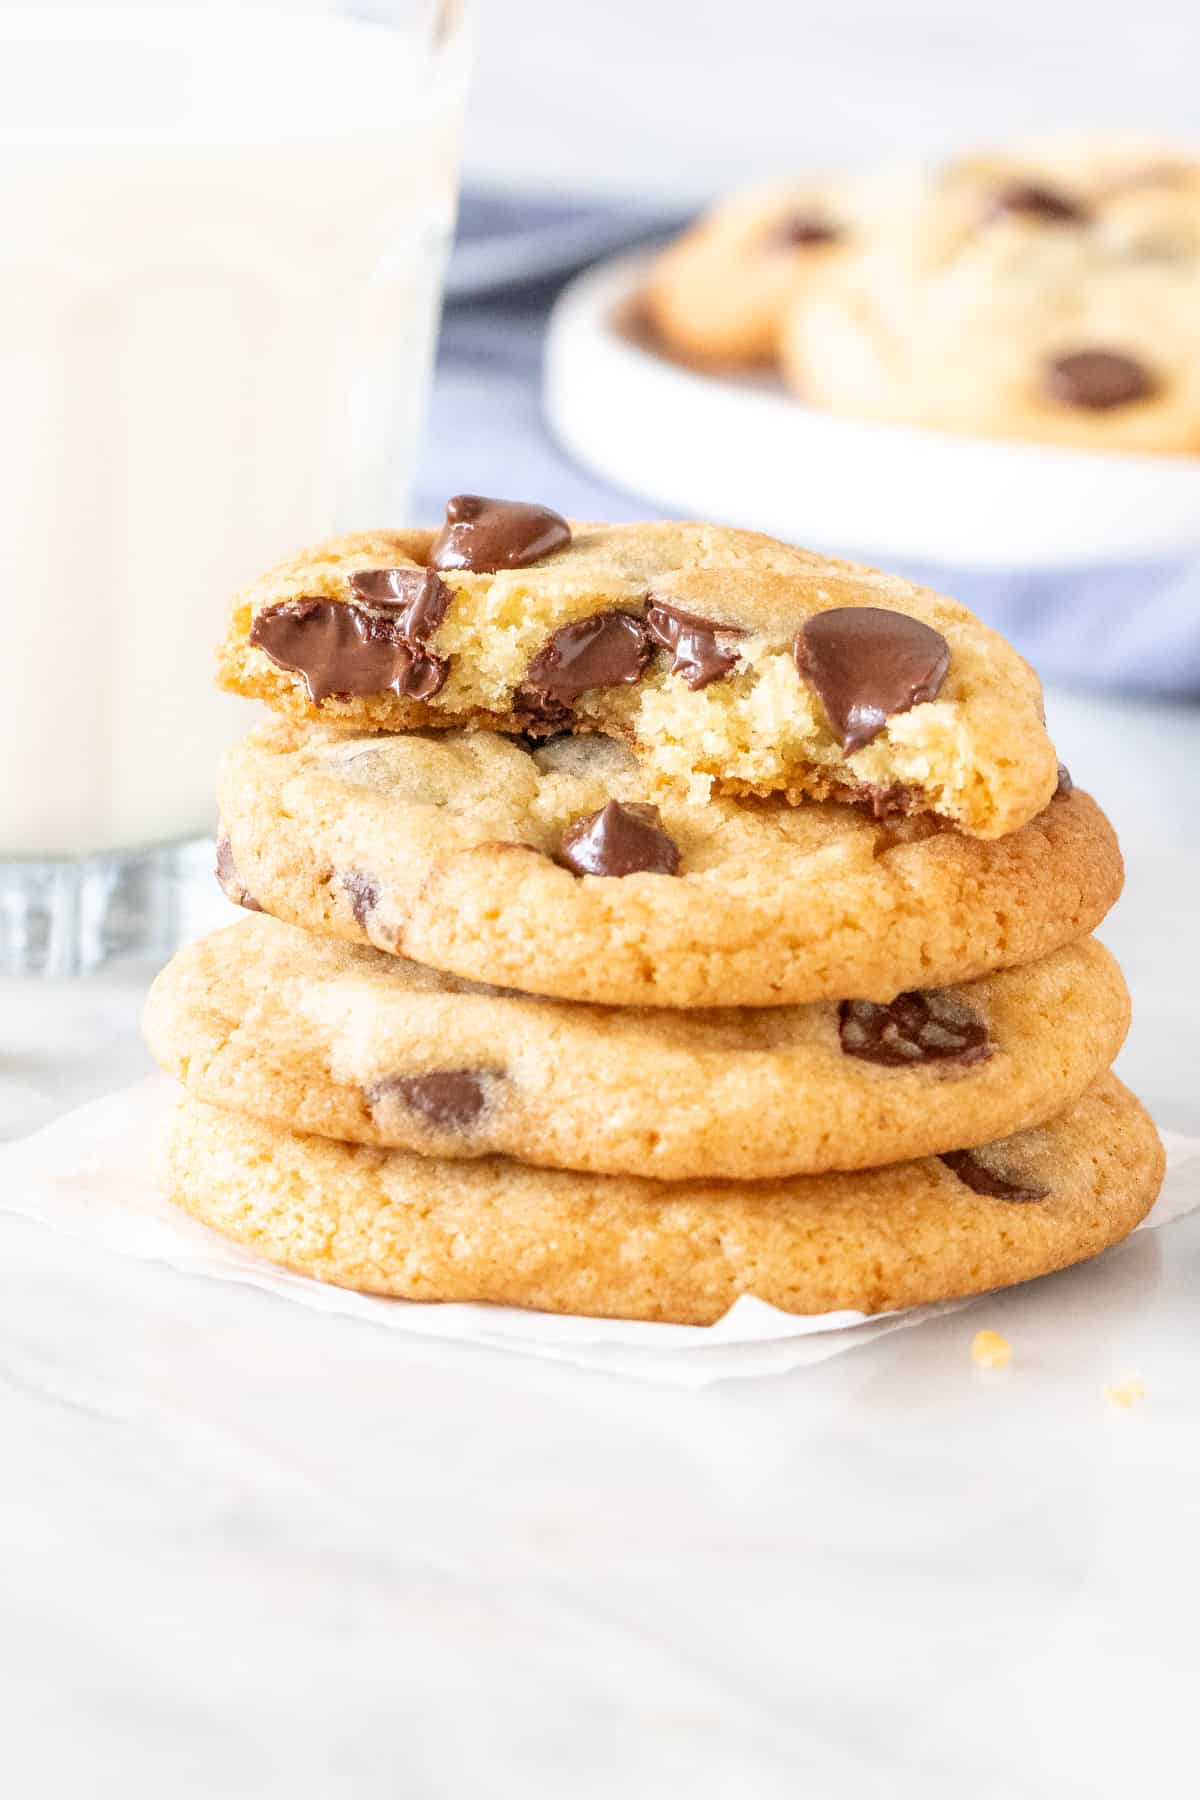 Stack of chewy chocolate chip cookies, with the top cookie broken in half